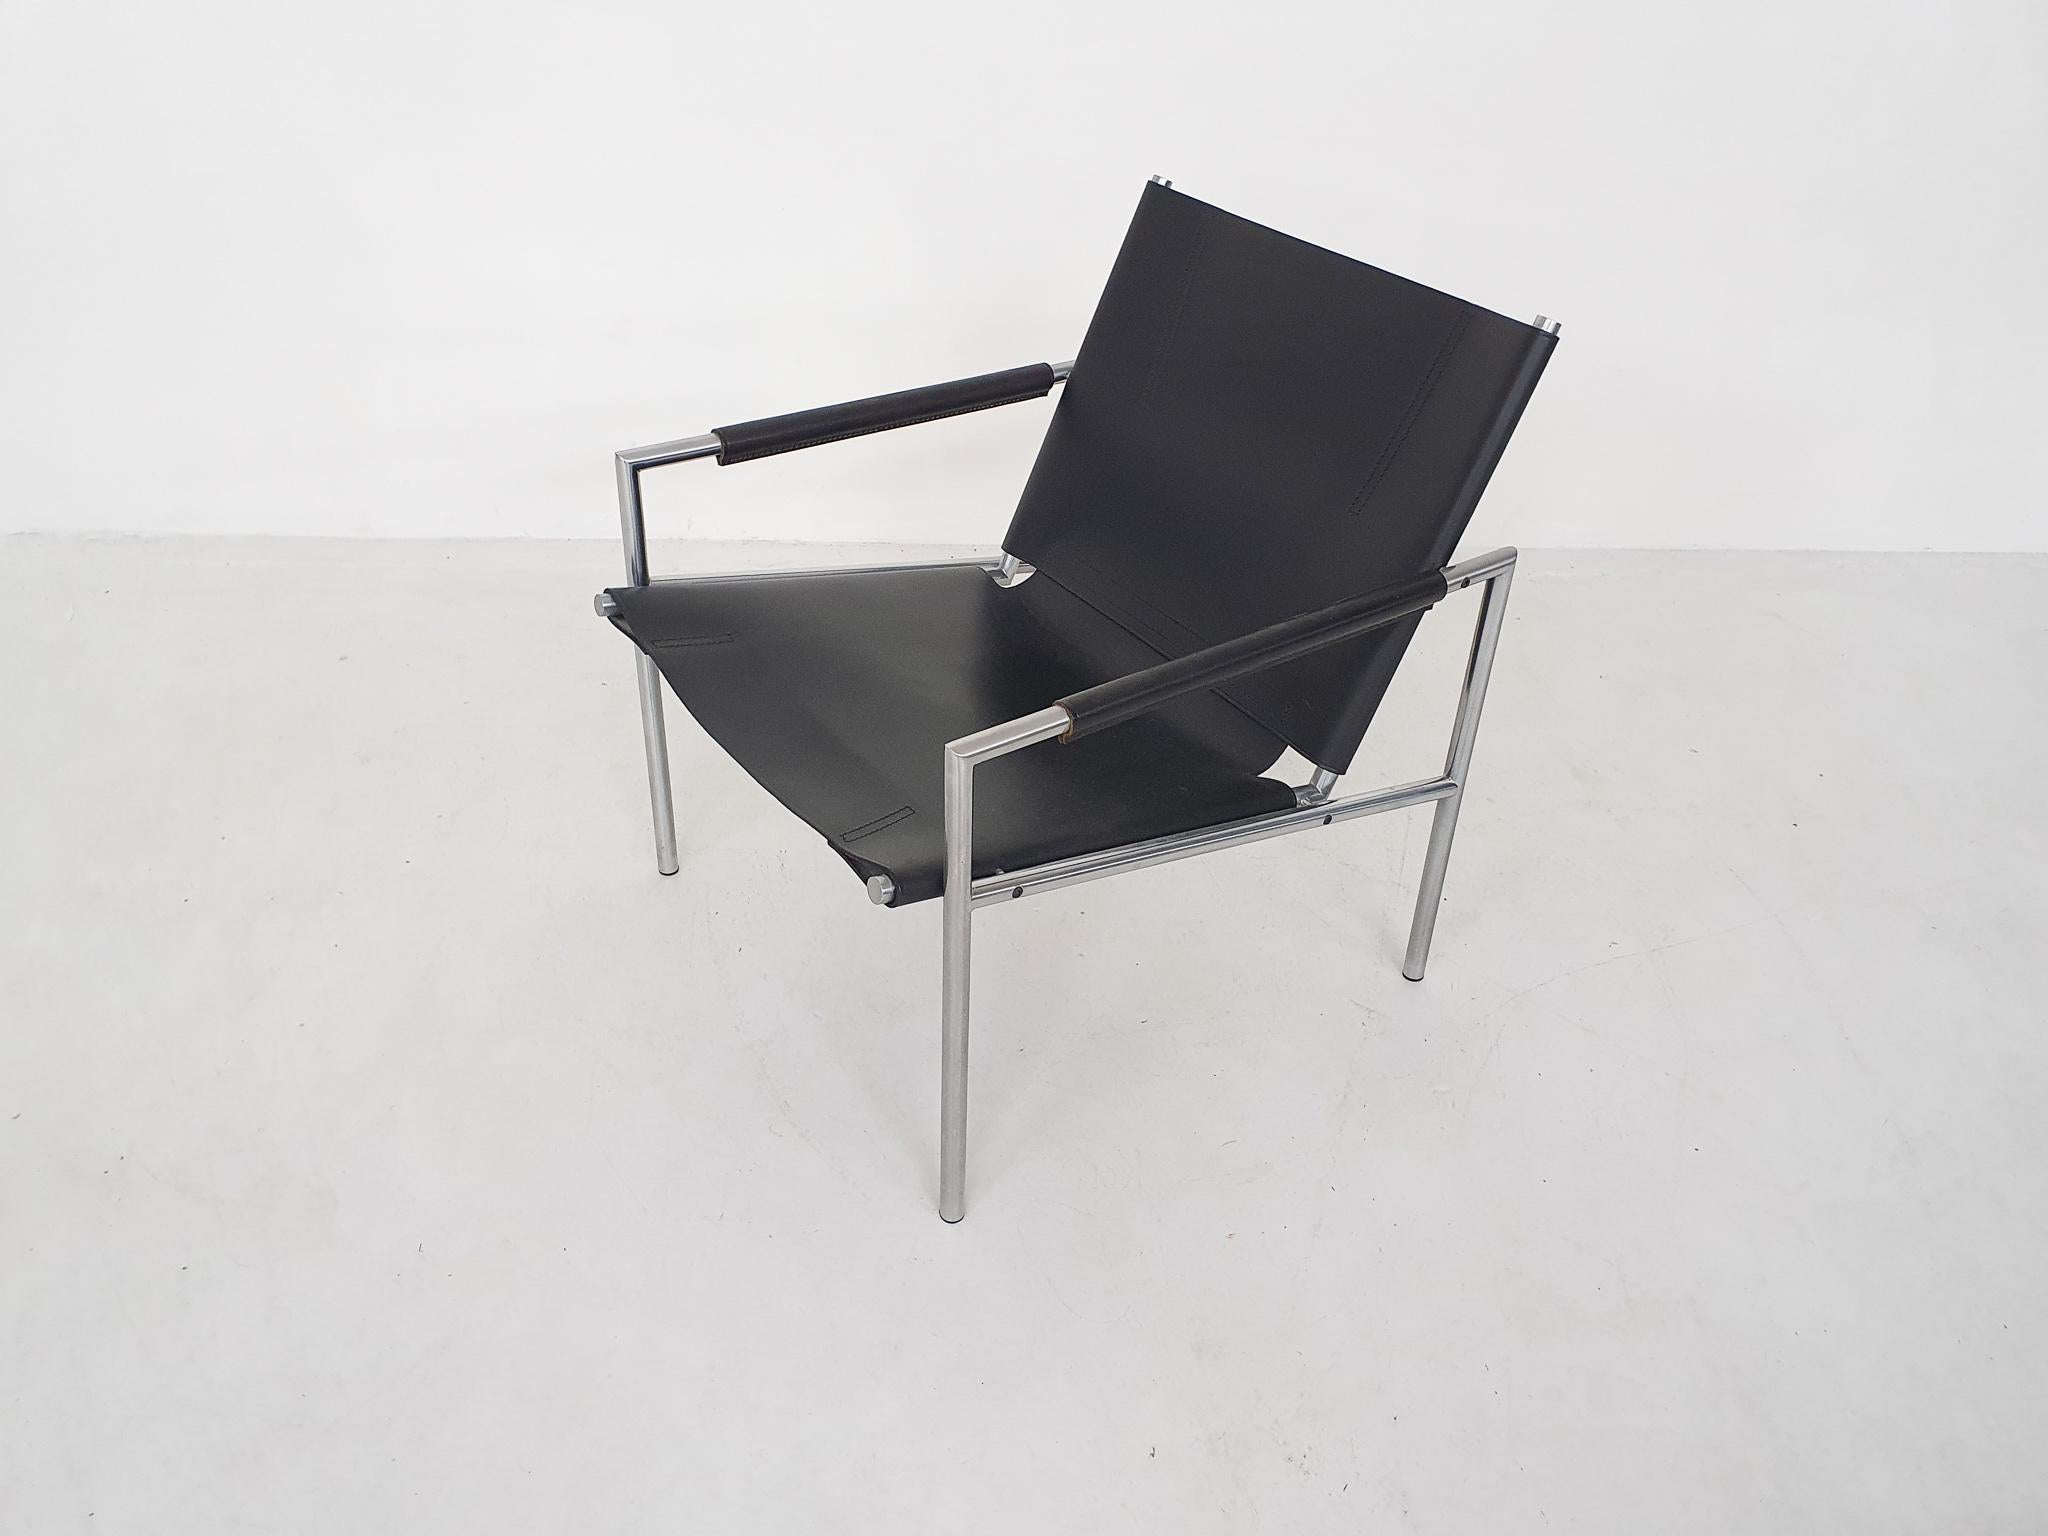 Designed in 1964 by Martin Visser for 't Spectrum in the Netherlands.
Metal frame and black saddle leather seating and back. This is a newer model.

Martin Visser was one of the leading Dutch designers of the midcentury together with Cees